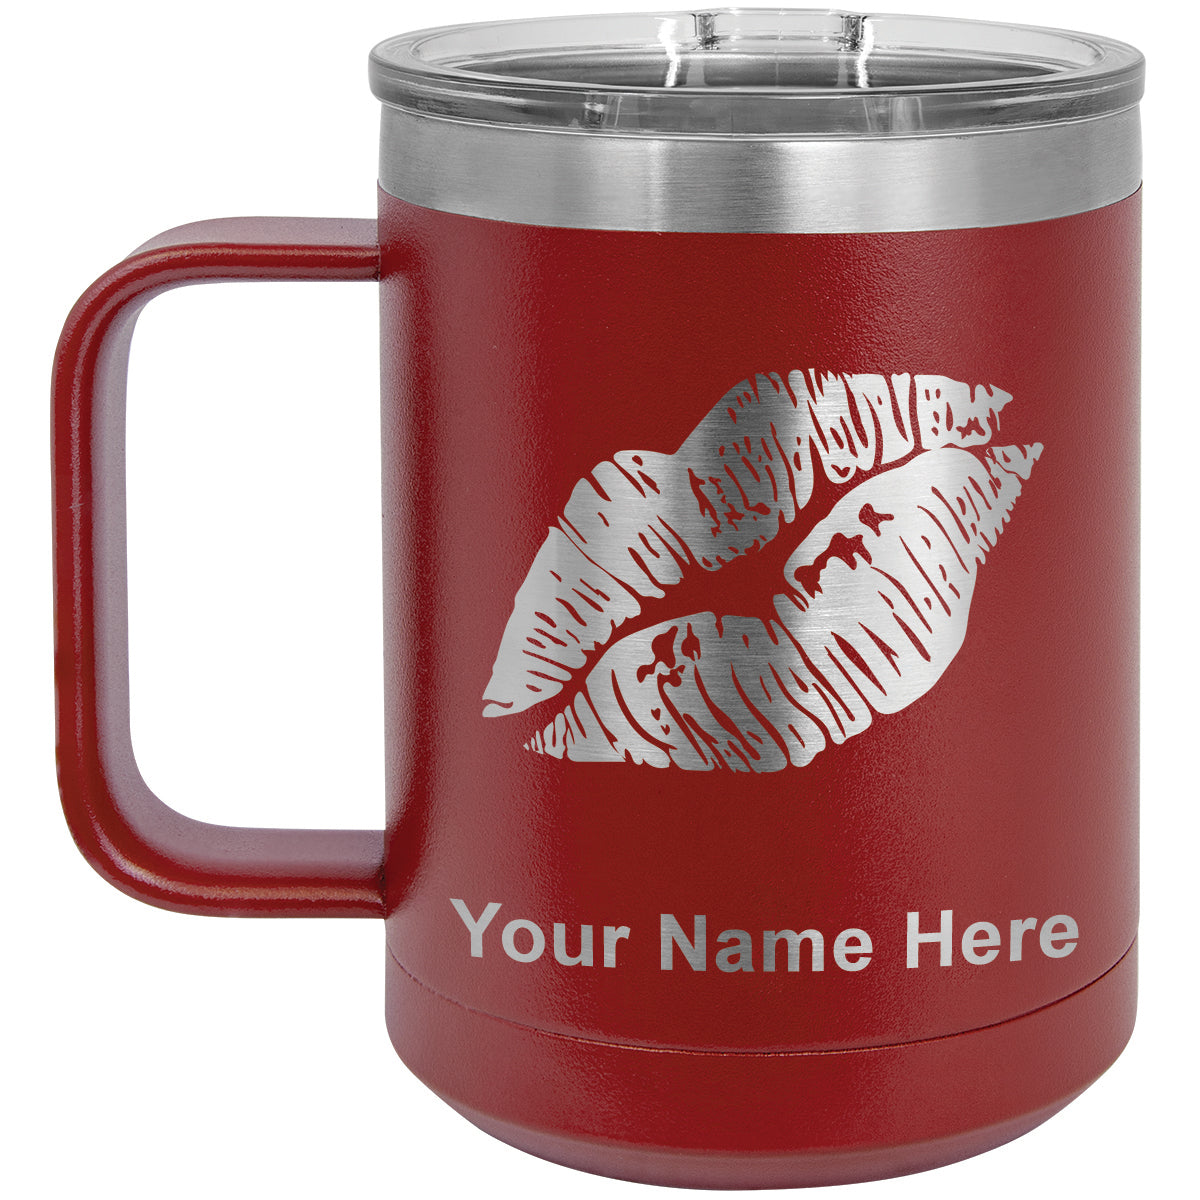 15oz Vacuum Insulated Coffee Mug, Lipstick Kiss, Personalized Engraving Included